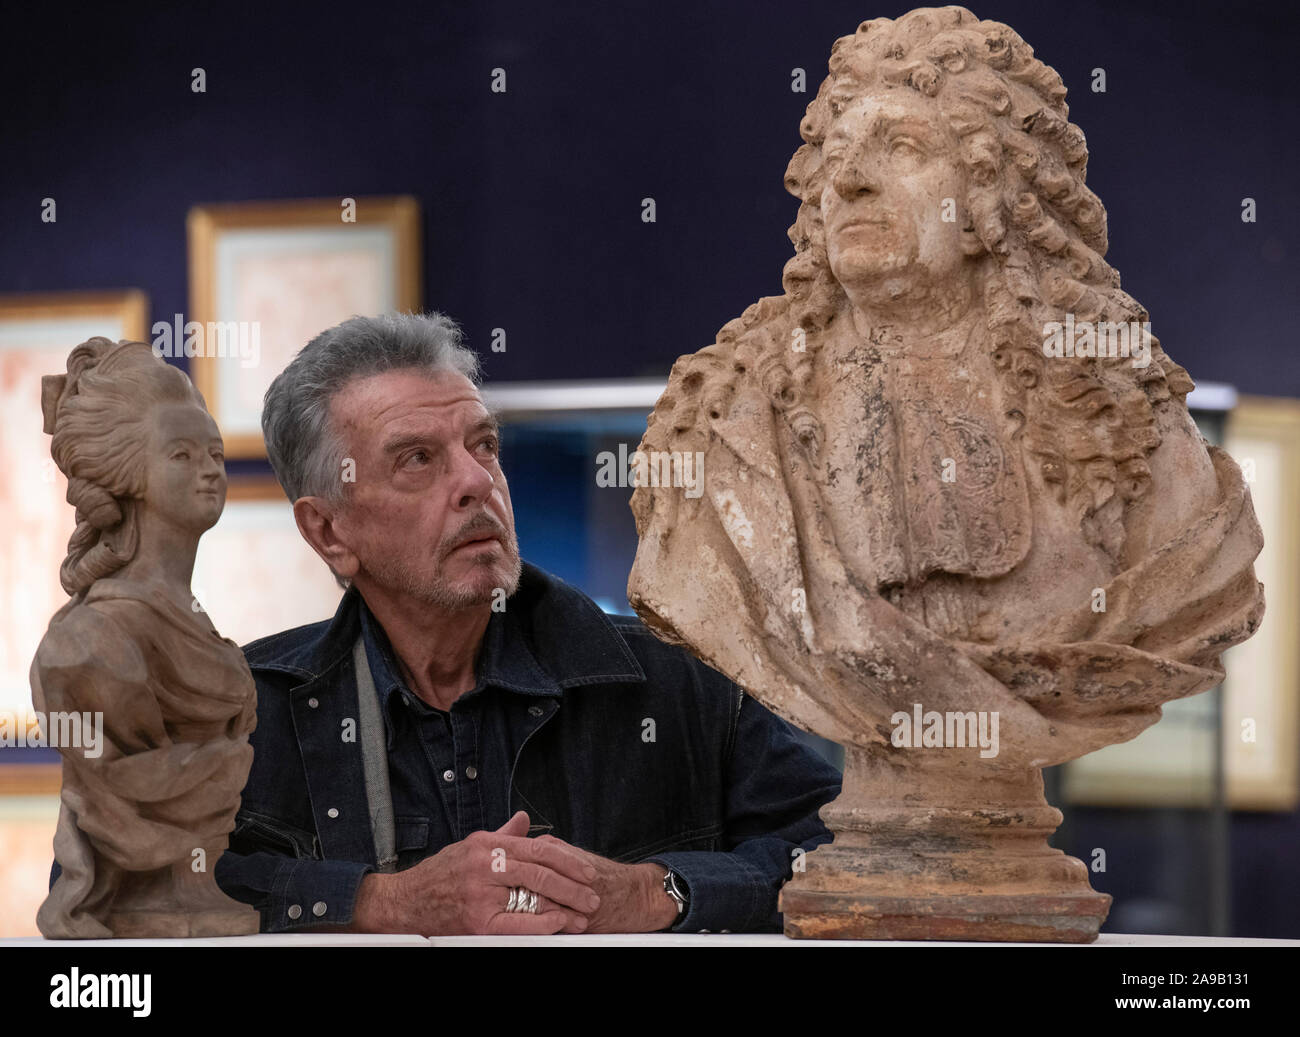 Bonhams, London, UK. 14th November 2019. Nicky Haslam, one of the world’s most celebrated interior designers, attends a photo call at Bonhams for the sale of his impressive collection from the Hunting Lodge in Hampshire, where Haslam has lived since 1978. Image: Nicky Haslam  with (right) French Terracotta washed plaster Bust of an 18th Century Nobleman.  Estimate: £800-1200. Credit: Malcolm Park/Alamy Live News. Stock Photo